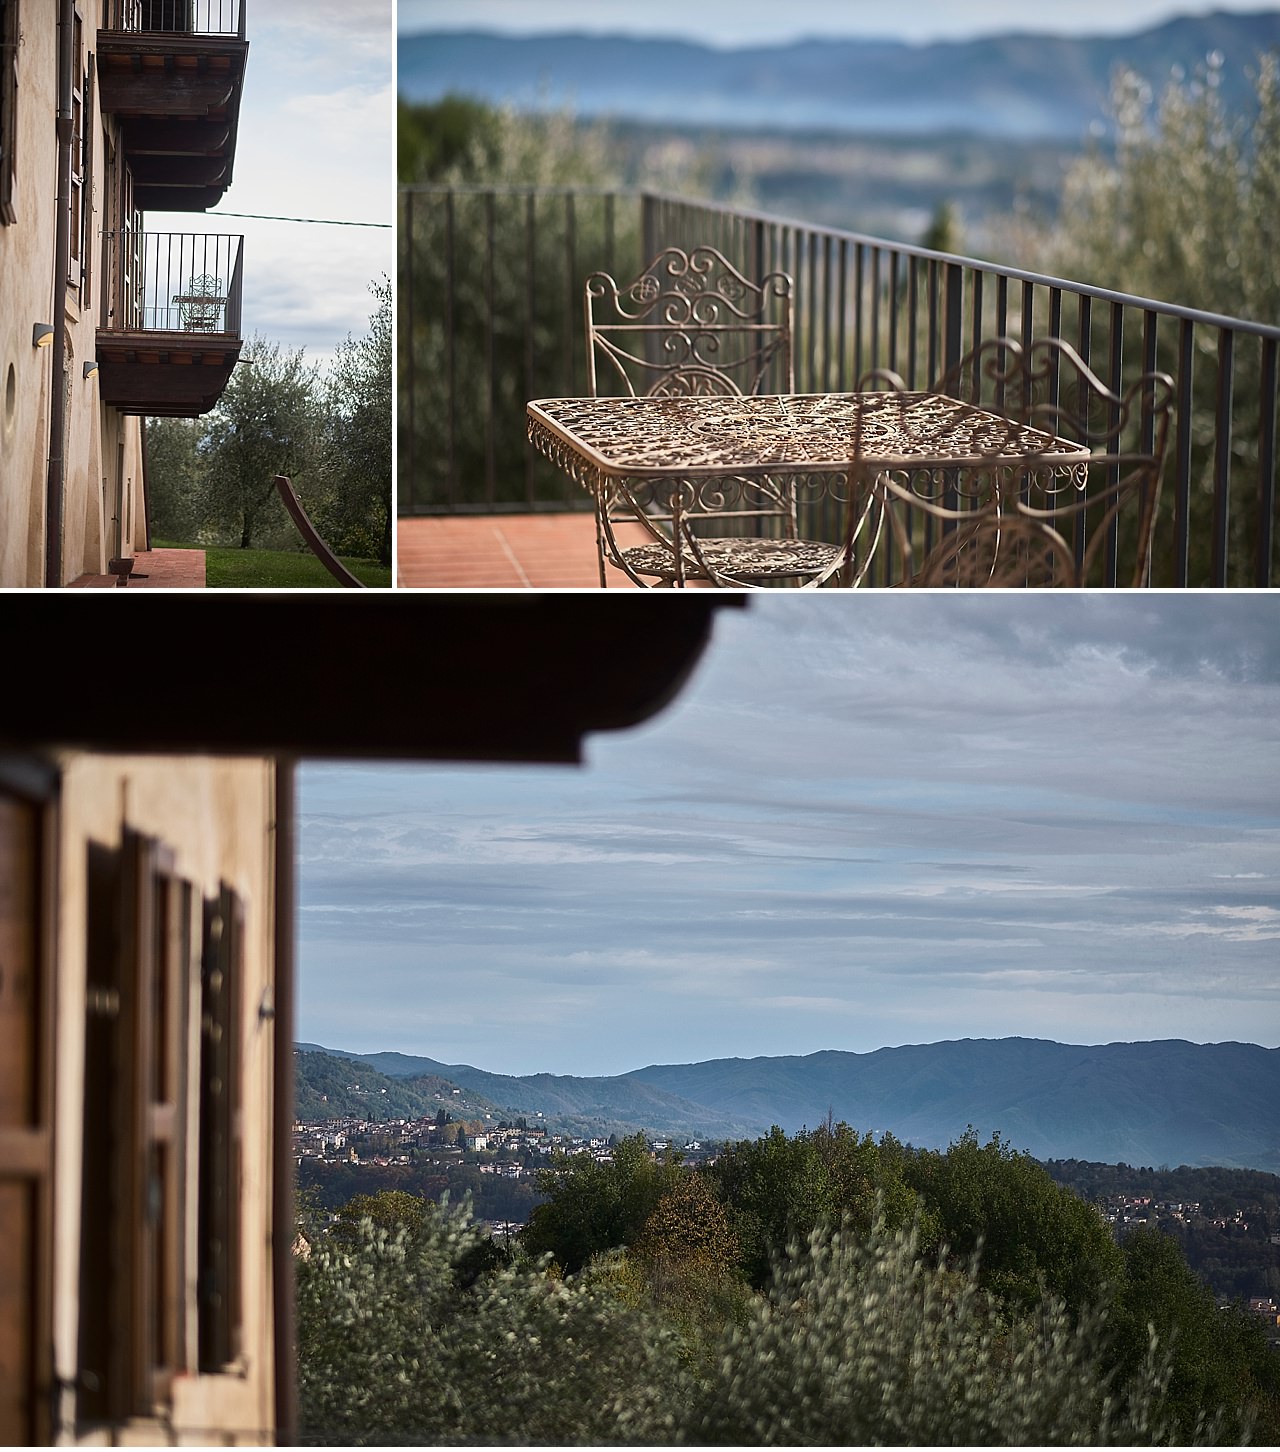  Ancient restored mountain villa in Garfagnana, overlooking the Serchio valley near the Devil's Bridge. wide spaces and rooms on three floors furnished with classic style combined with modern elements. Near to barga and castelnuovo this villa is sure